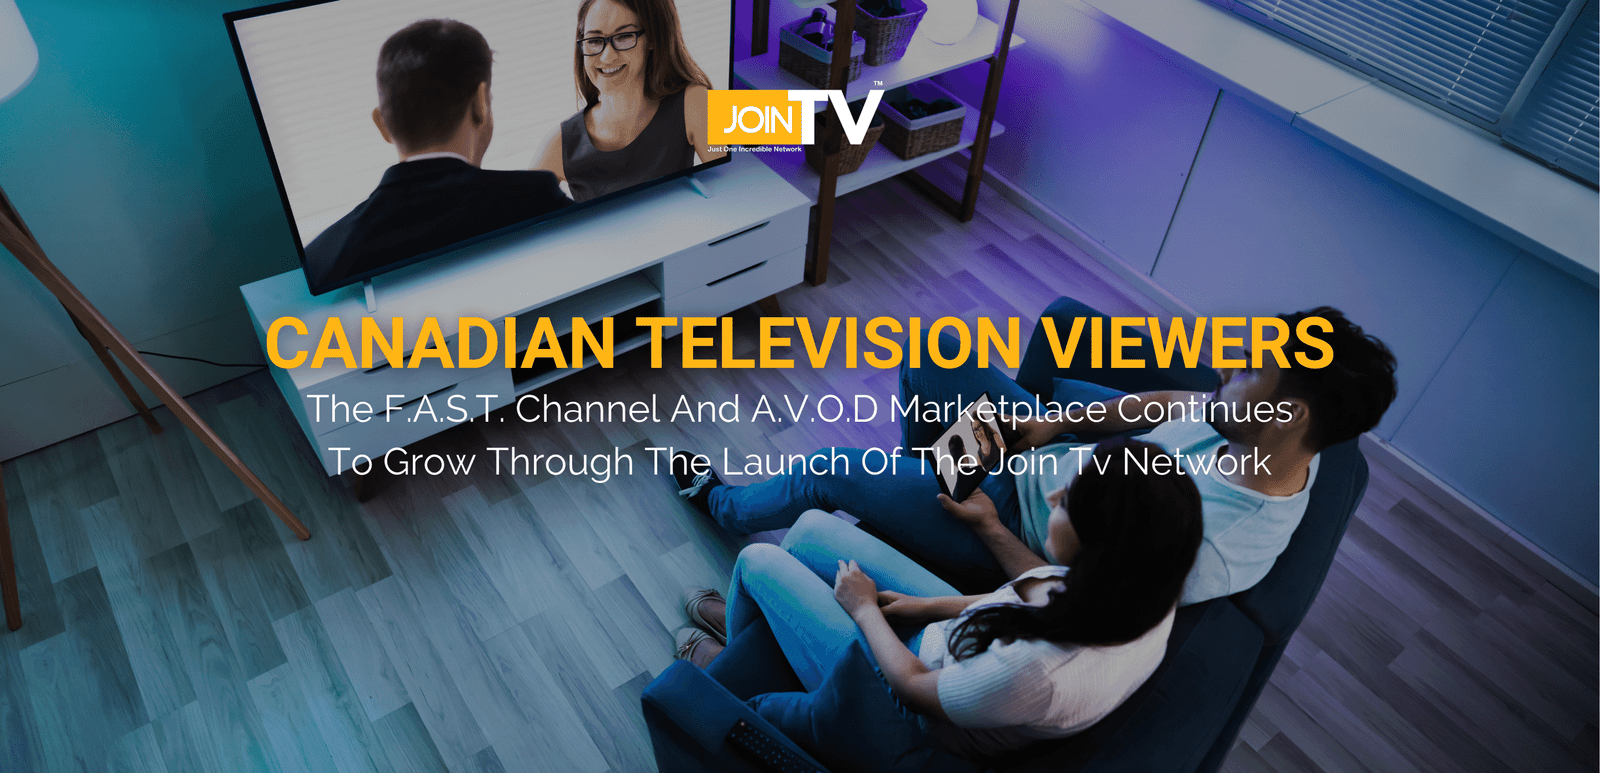 Good News For Canadian Television Viewers As The F.A.S.T. Channel And A.V.O.D Marketplace Continues To Grow Through The Launch Of The Join Tv Network